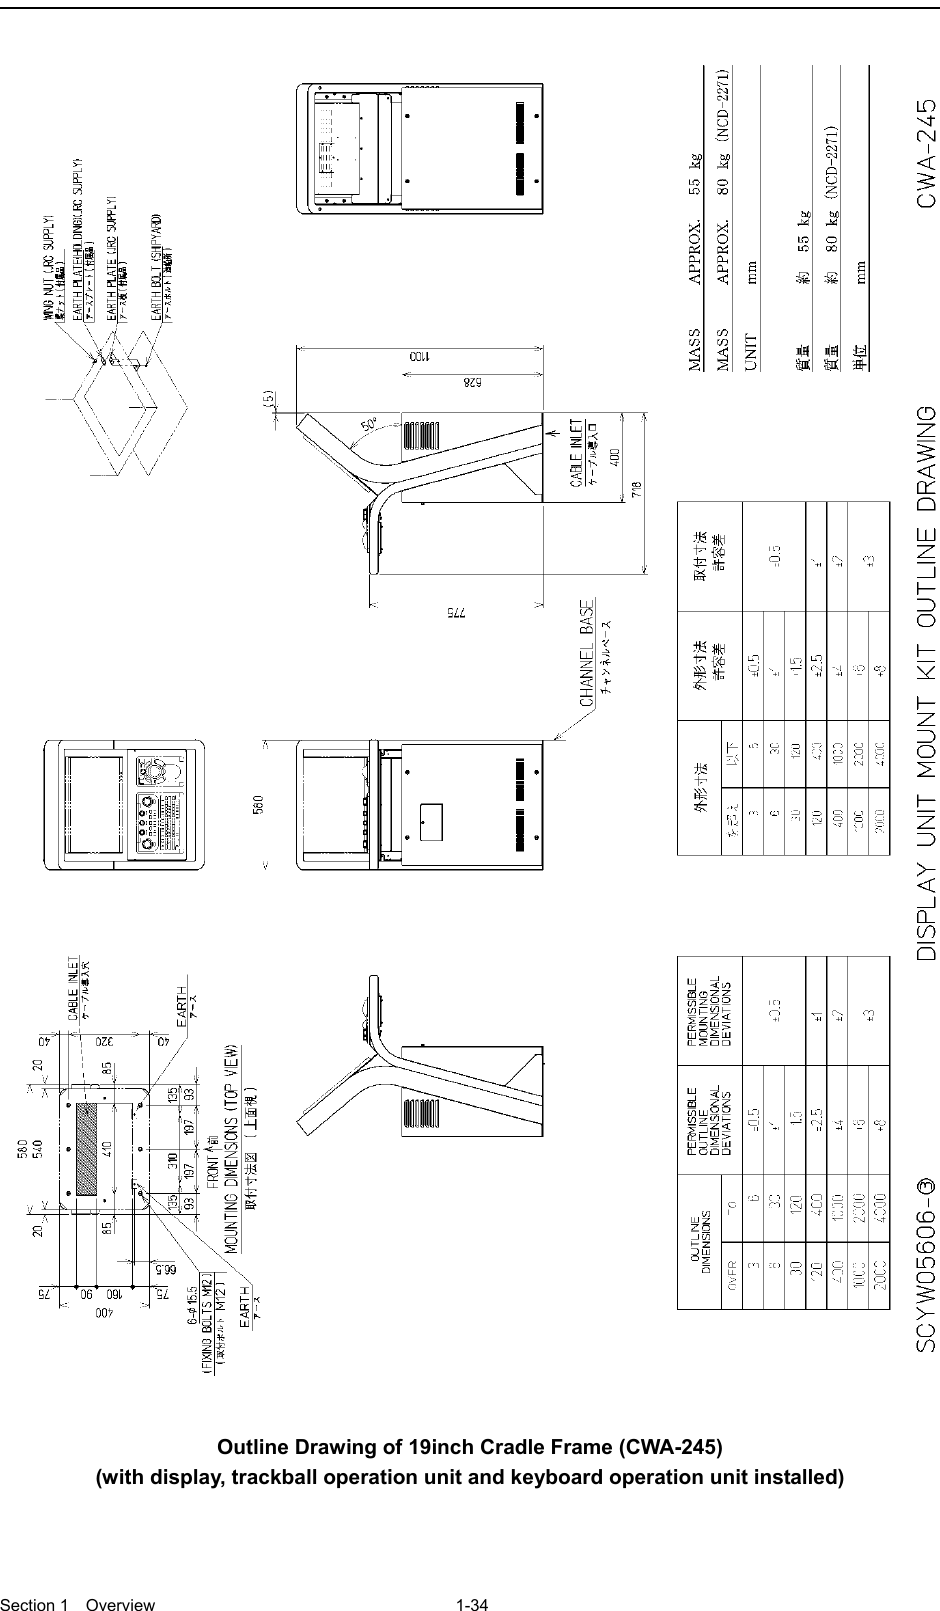  Section 1  Overview 1-34      Outline Drawing of 19inch Cradle Frame (CWA-245) (with display, trackball operation unit and keyboard operation unit installed)  